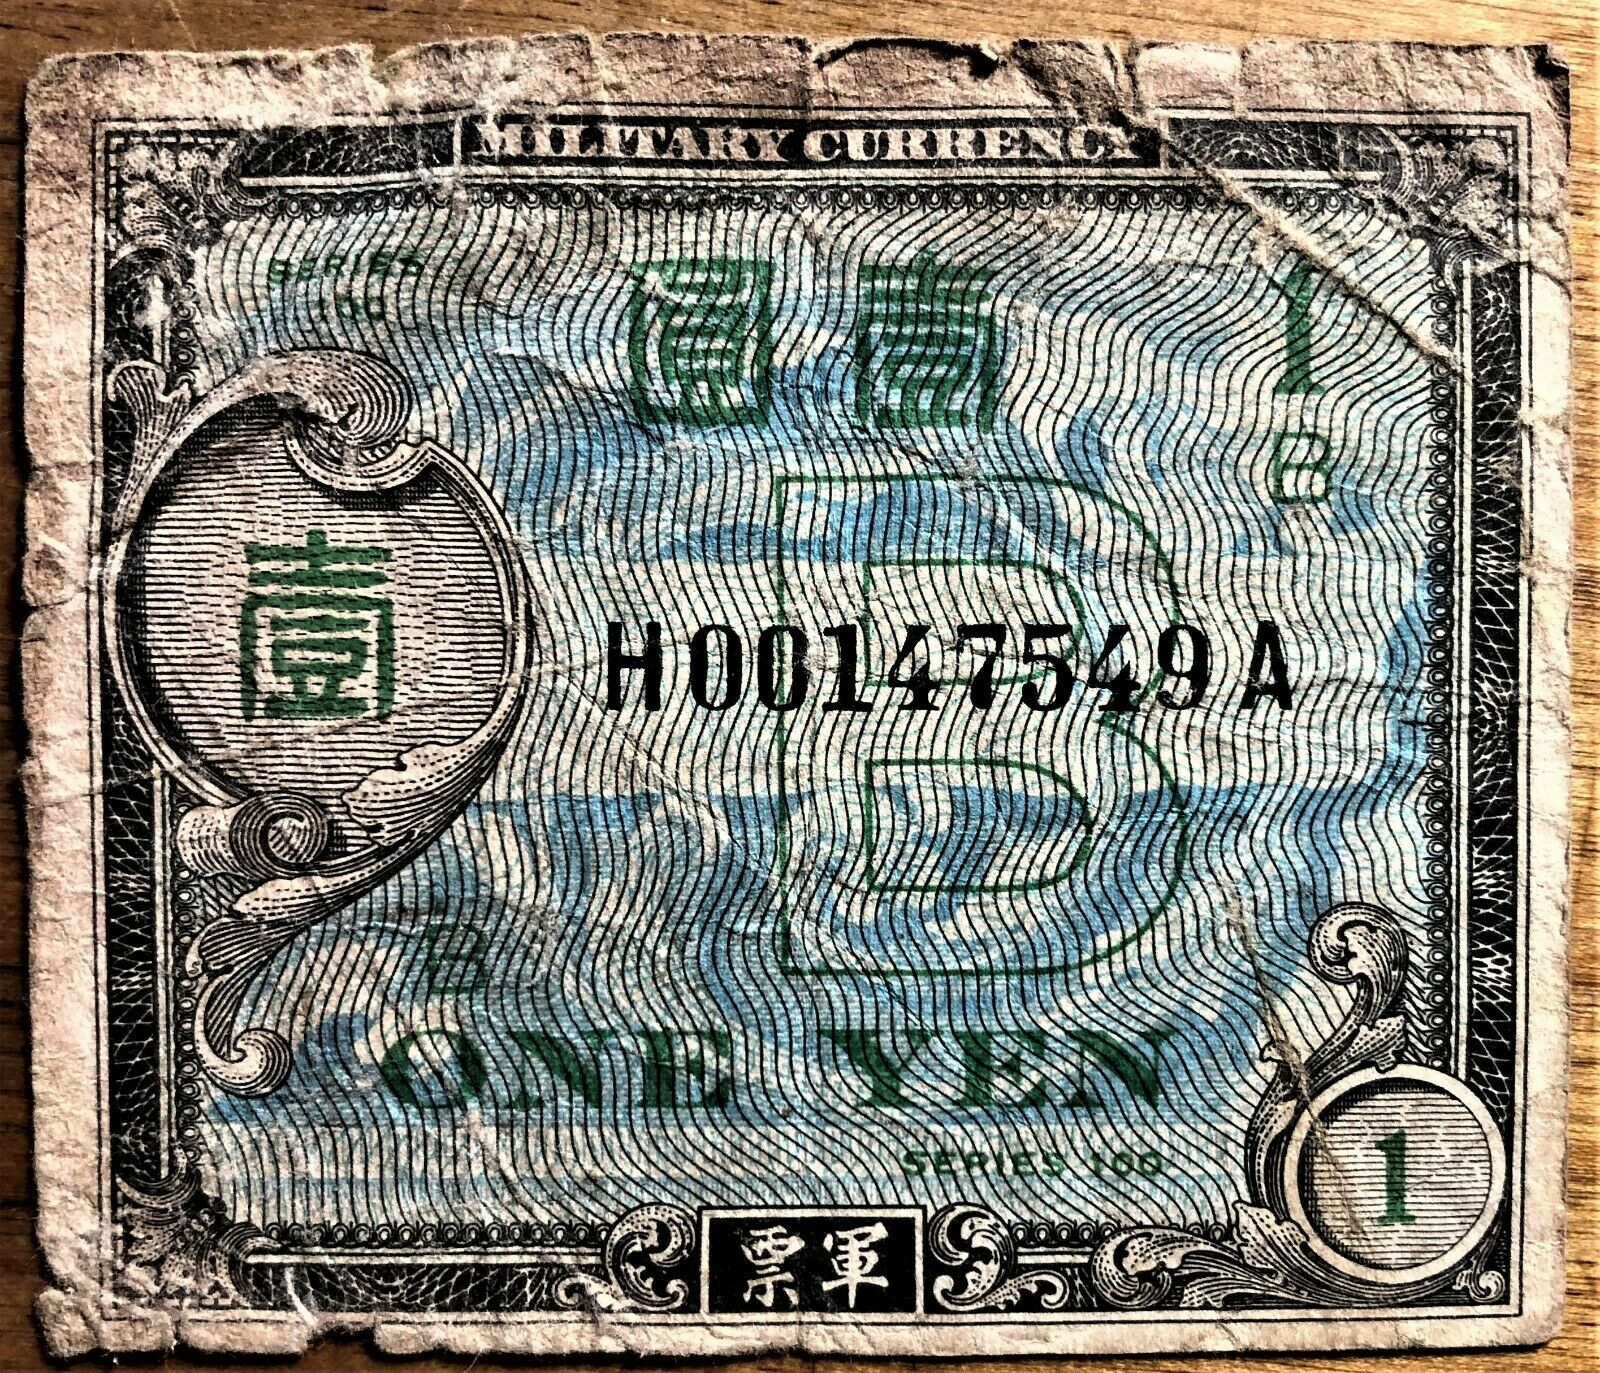 JAPAN ALLIED MILITARY CURRENCY 1 YEN REPLACEMENT BANK NOTE PREFIX H PICK # 67r